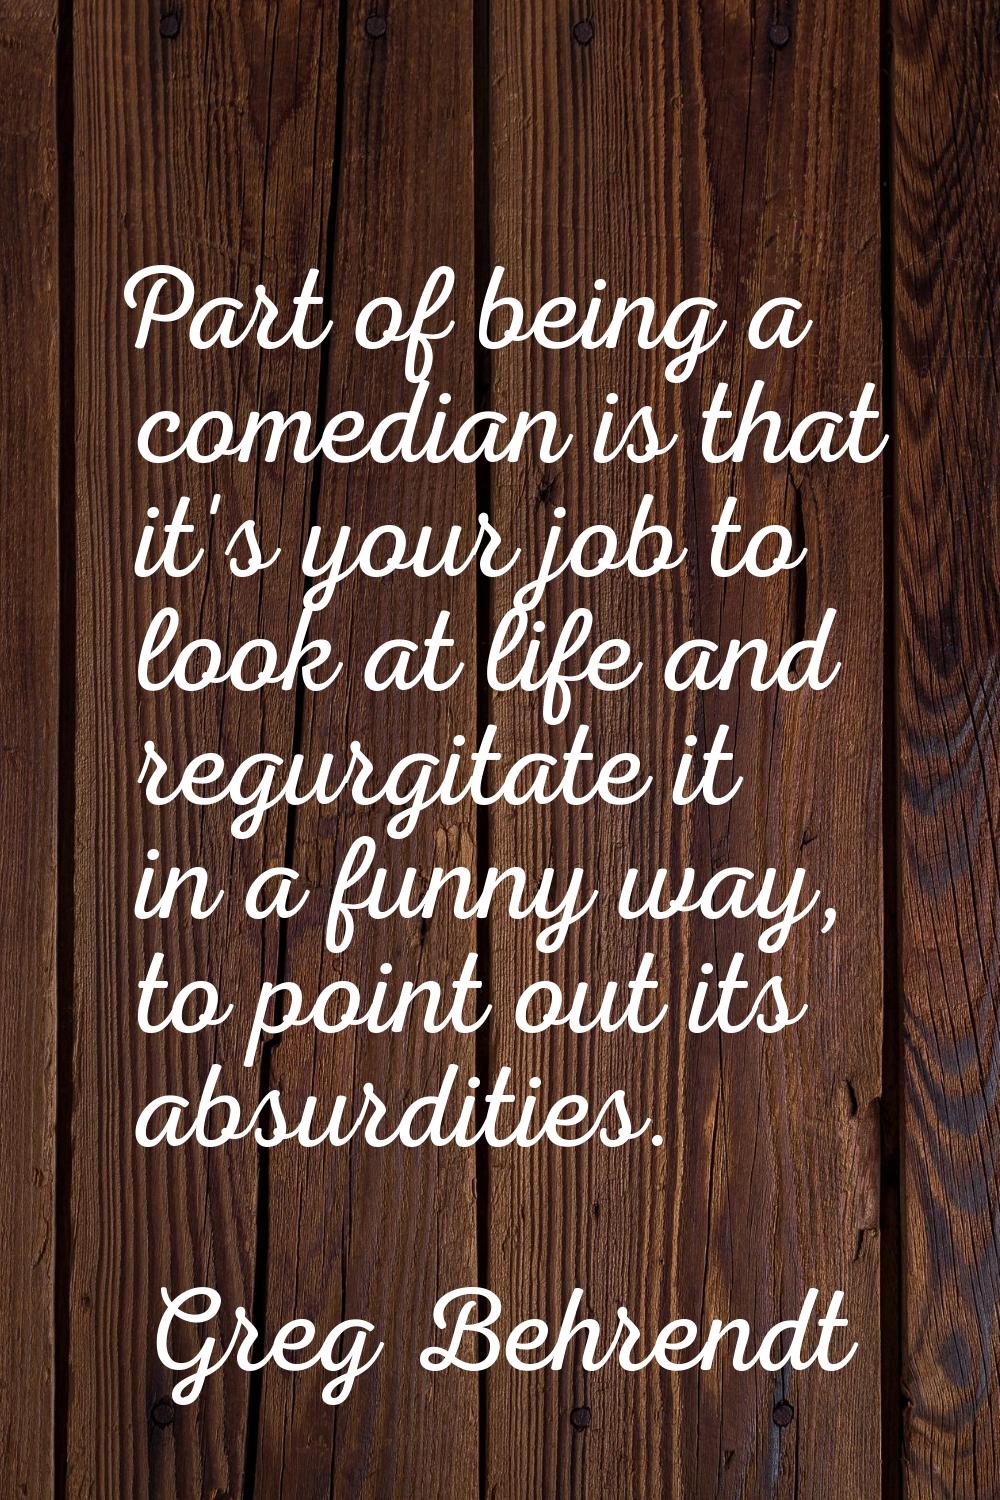 Part of being a comedian is that it's your job to look at life and regurgitate it in a funny way, t